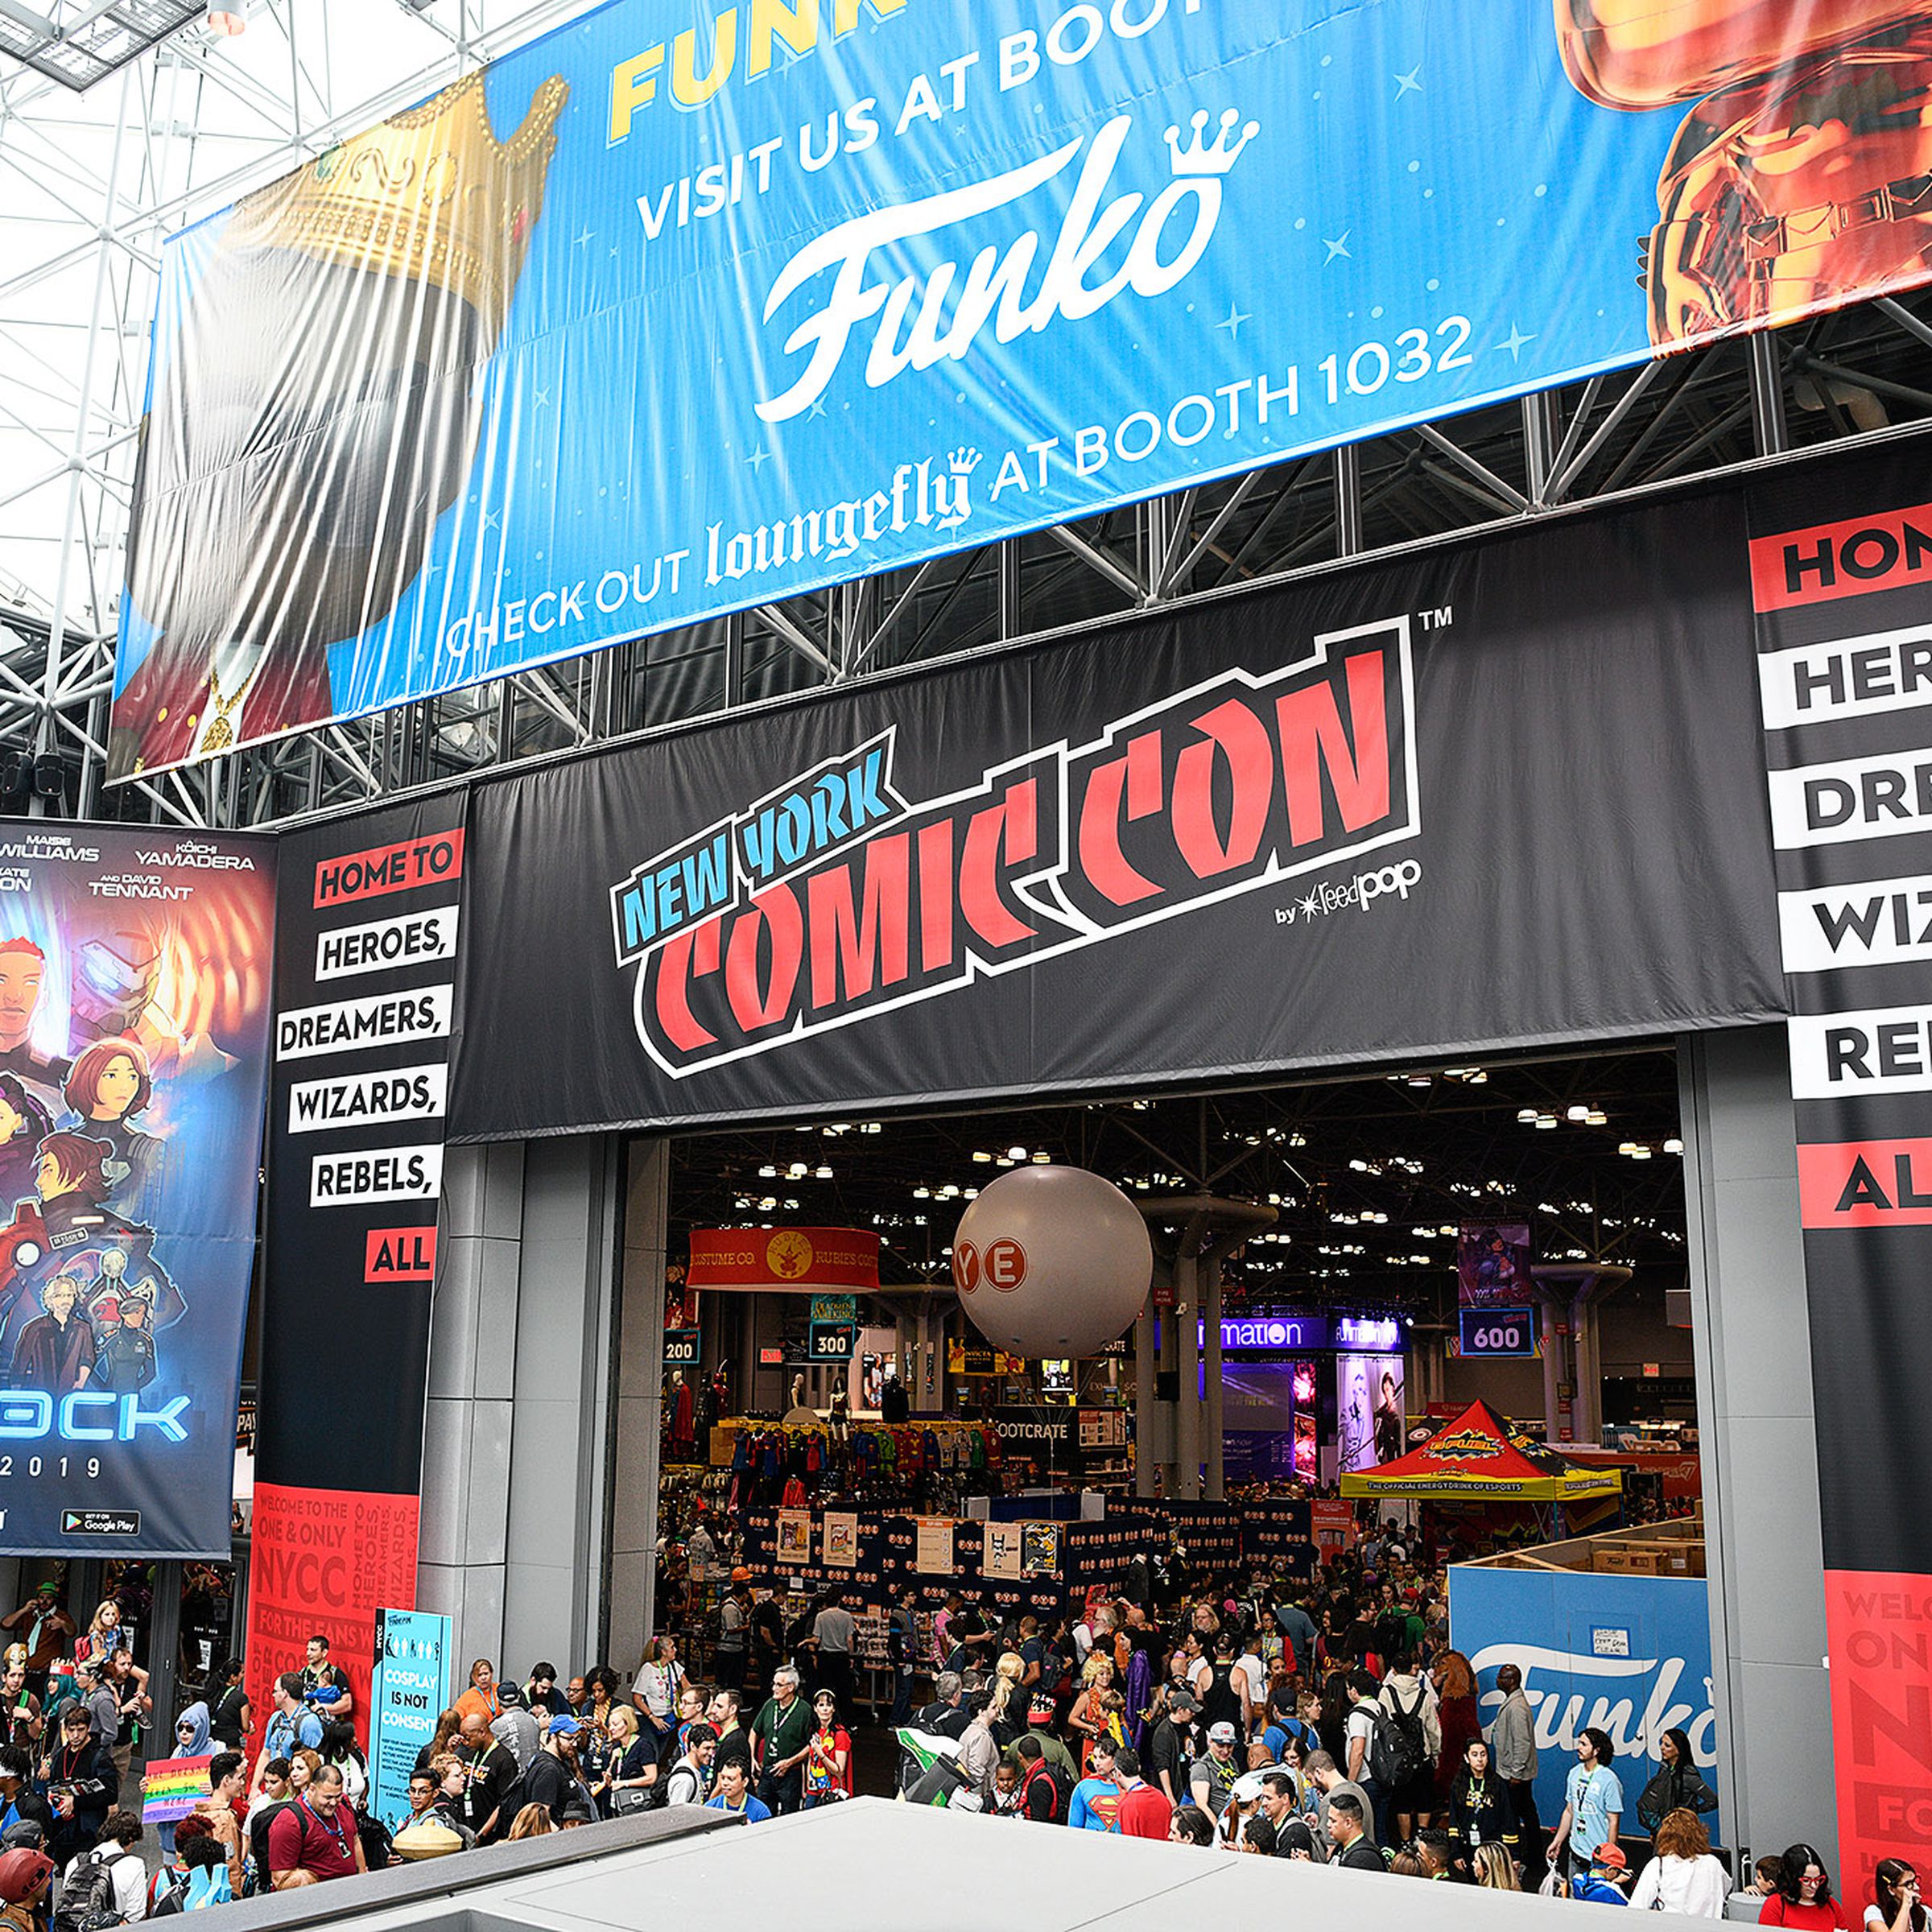 The main floor at New York Comic-Con 2018 at the Jacob K. Javits Convention Center in New York City, October 4-7, 2018.